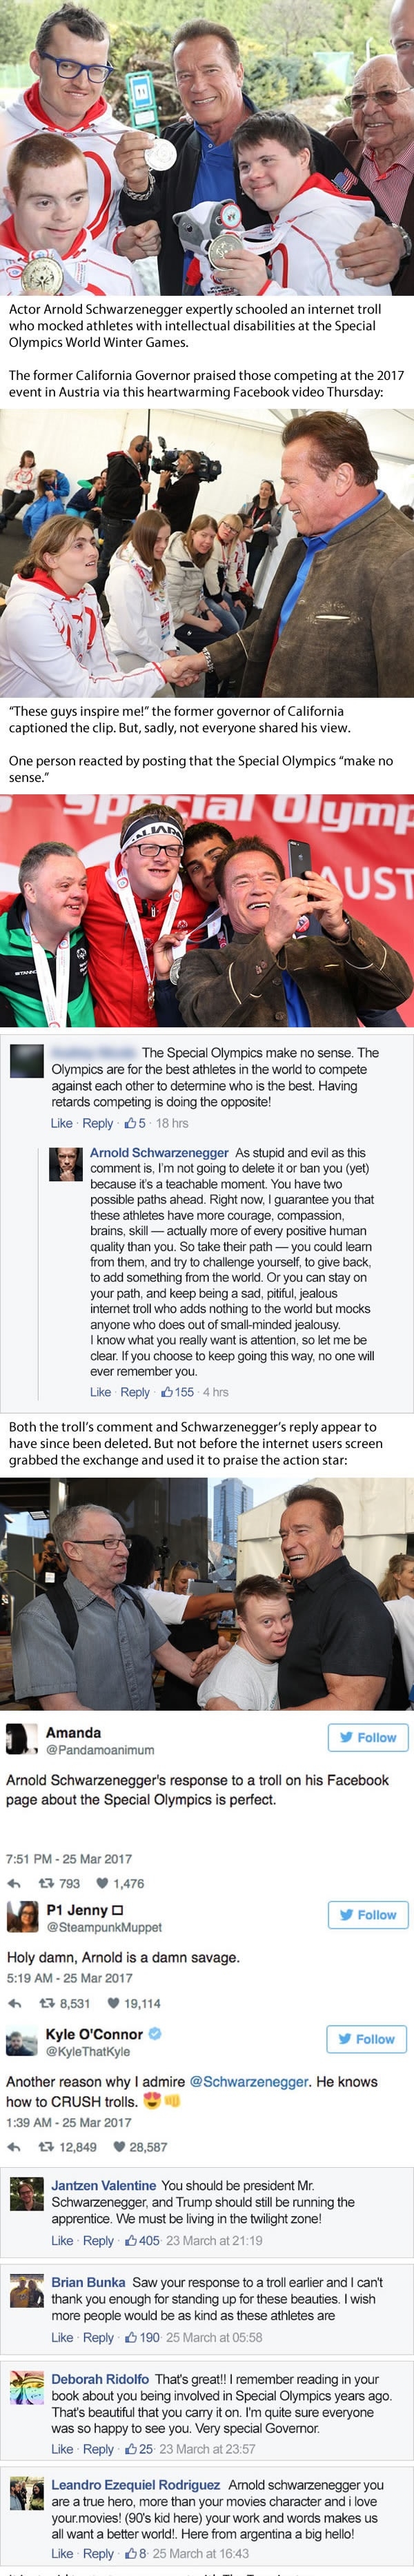 Arnold shuts down troll for mocking Special Olympics